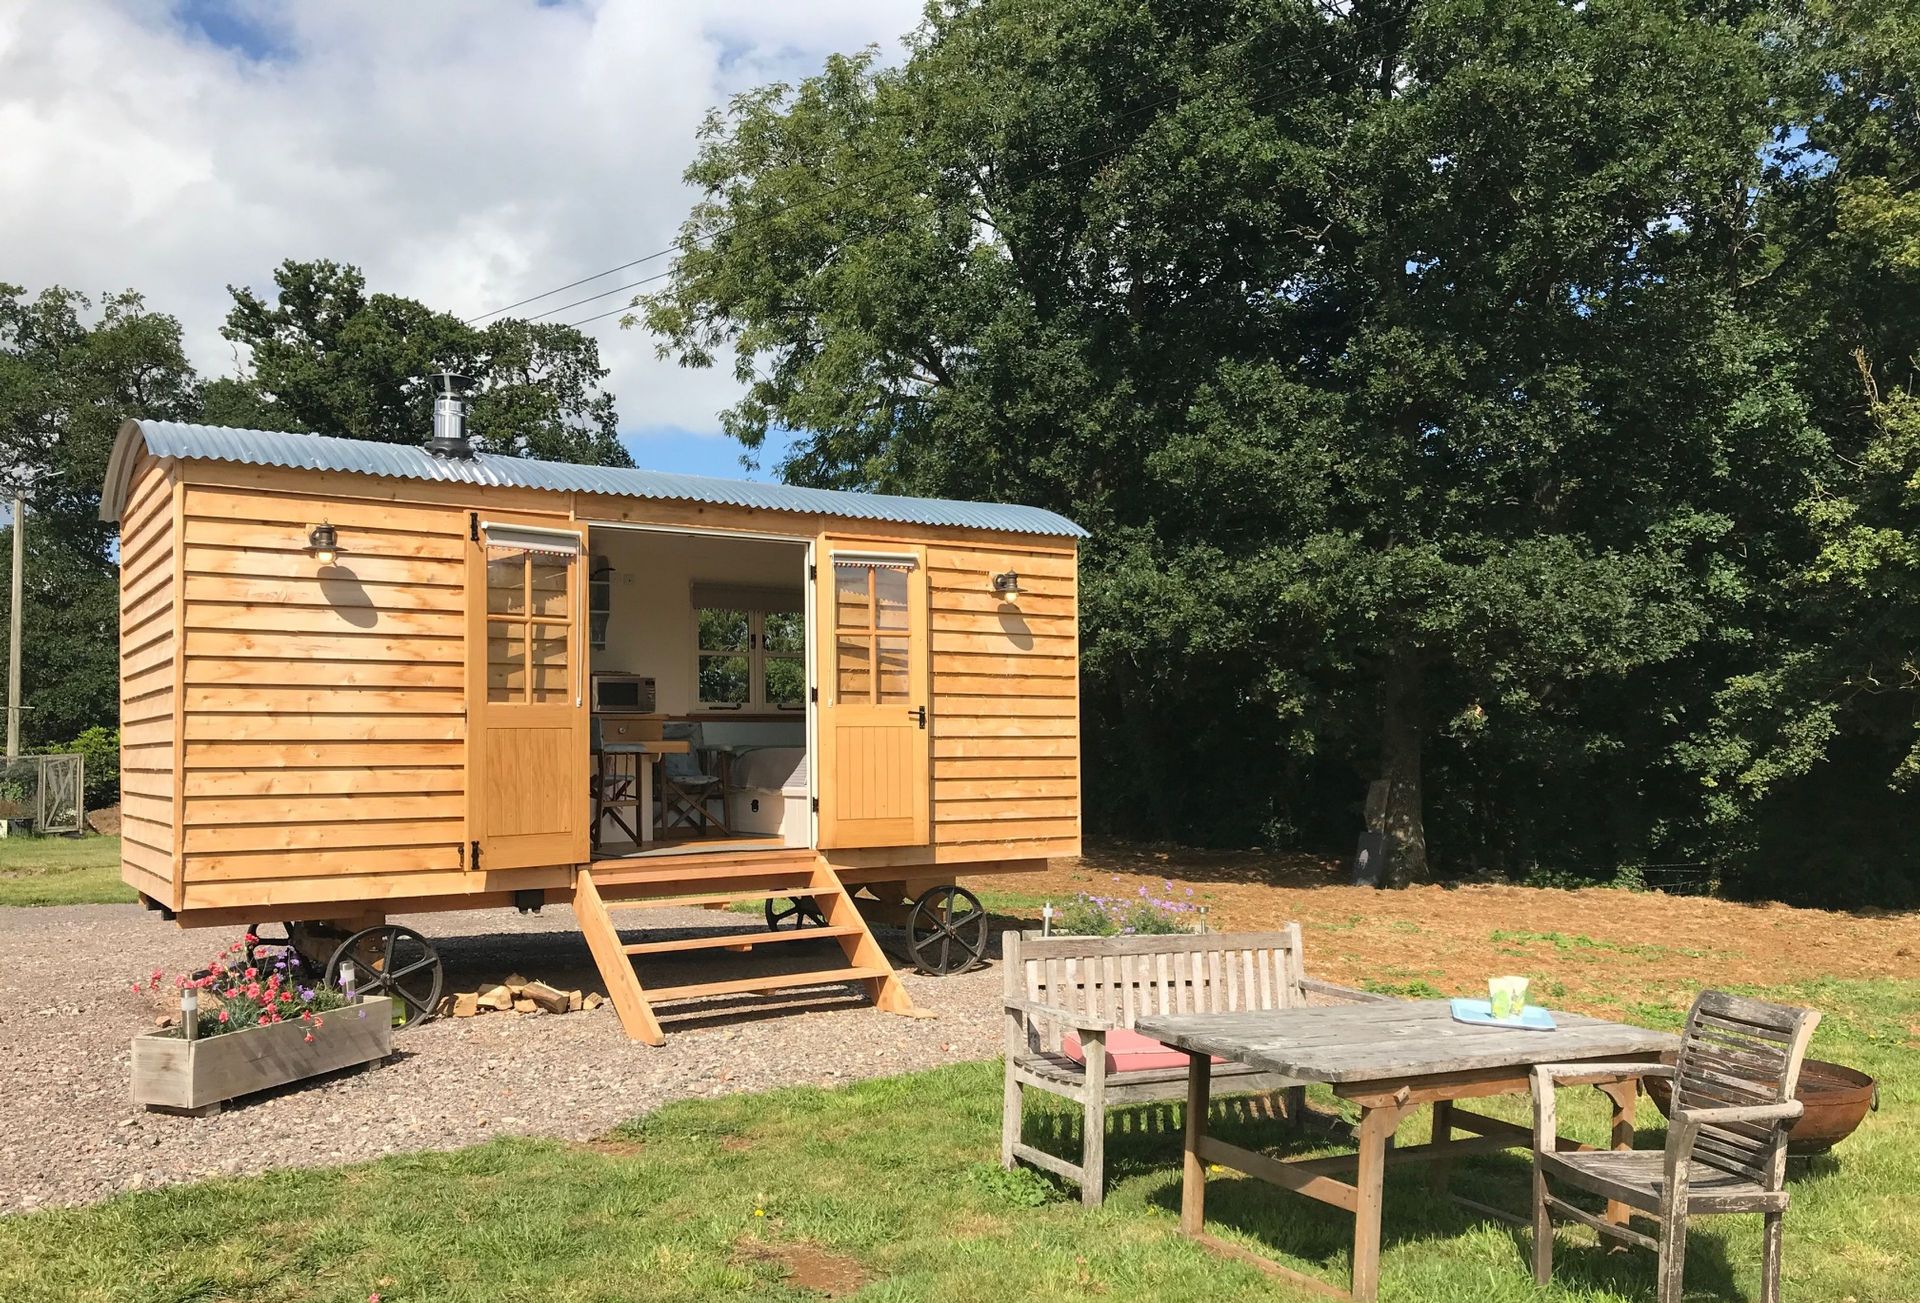 Click here for more about Blossom the shepherd's hut